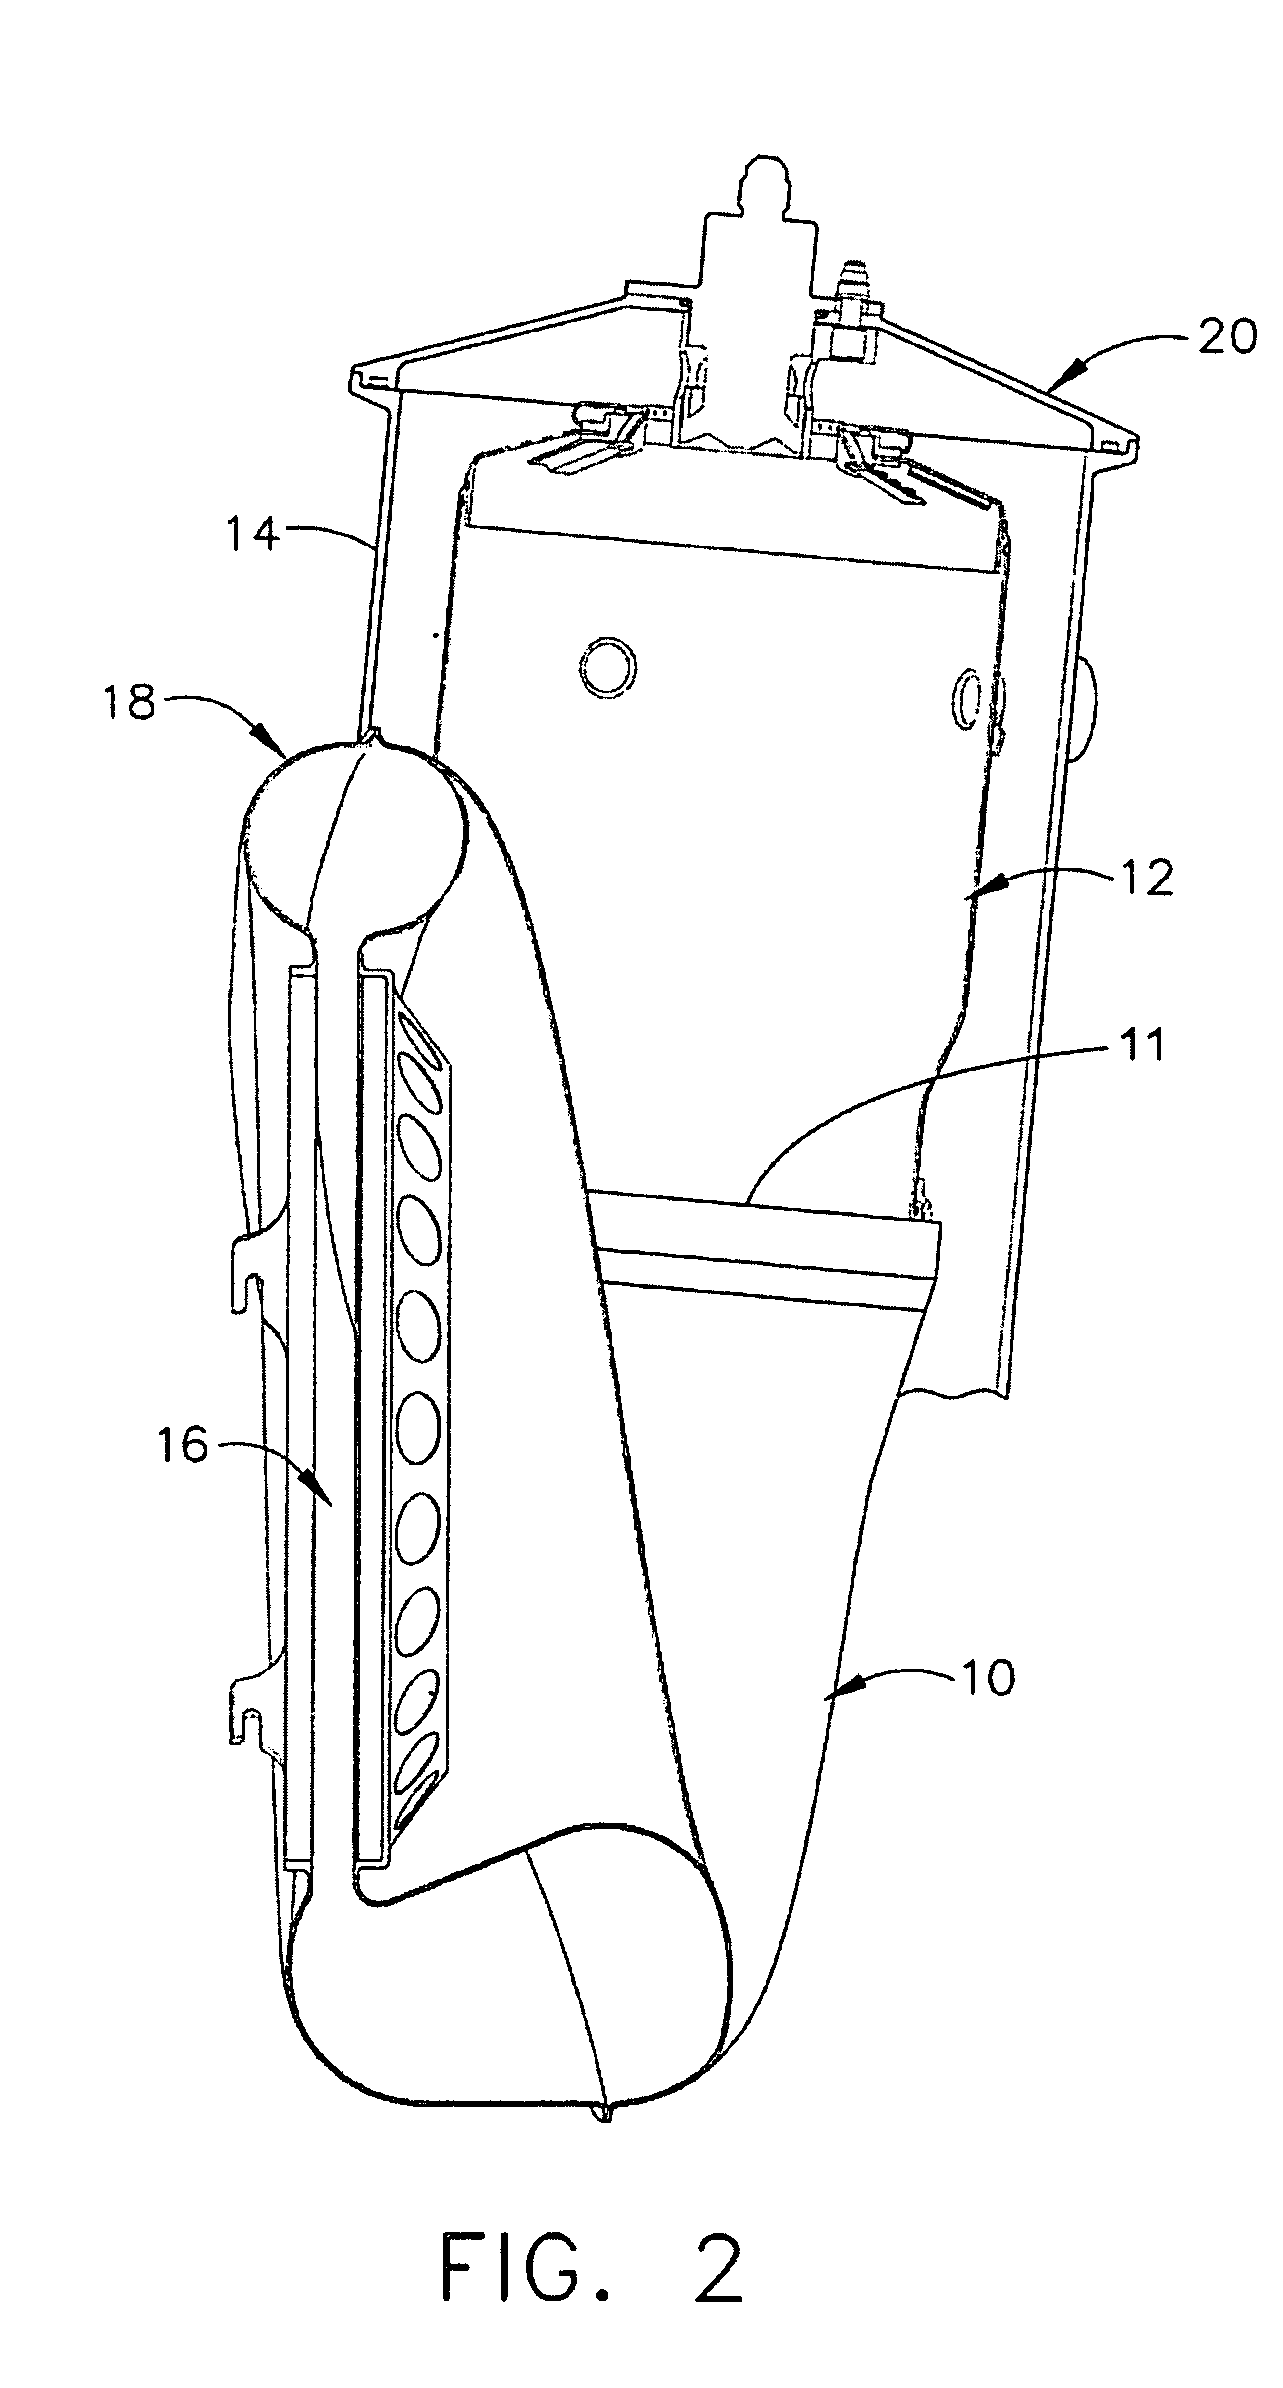 Conical helical of spiral combustor scroll device in gas turbine engine